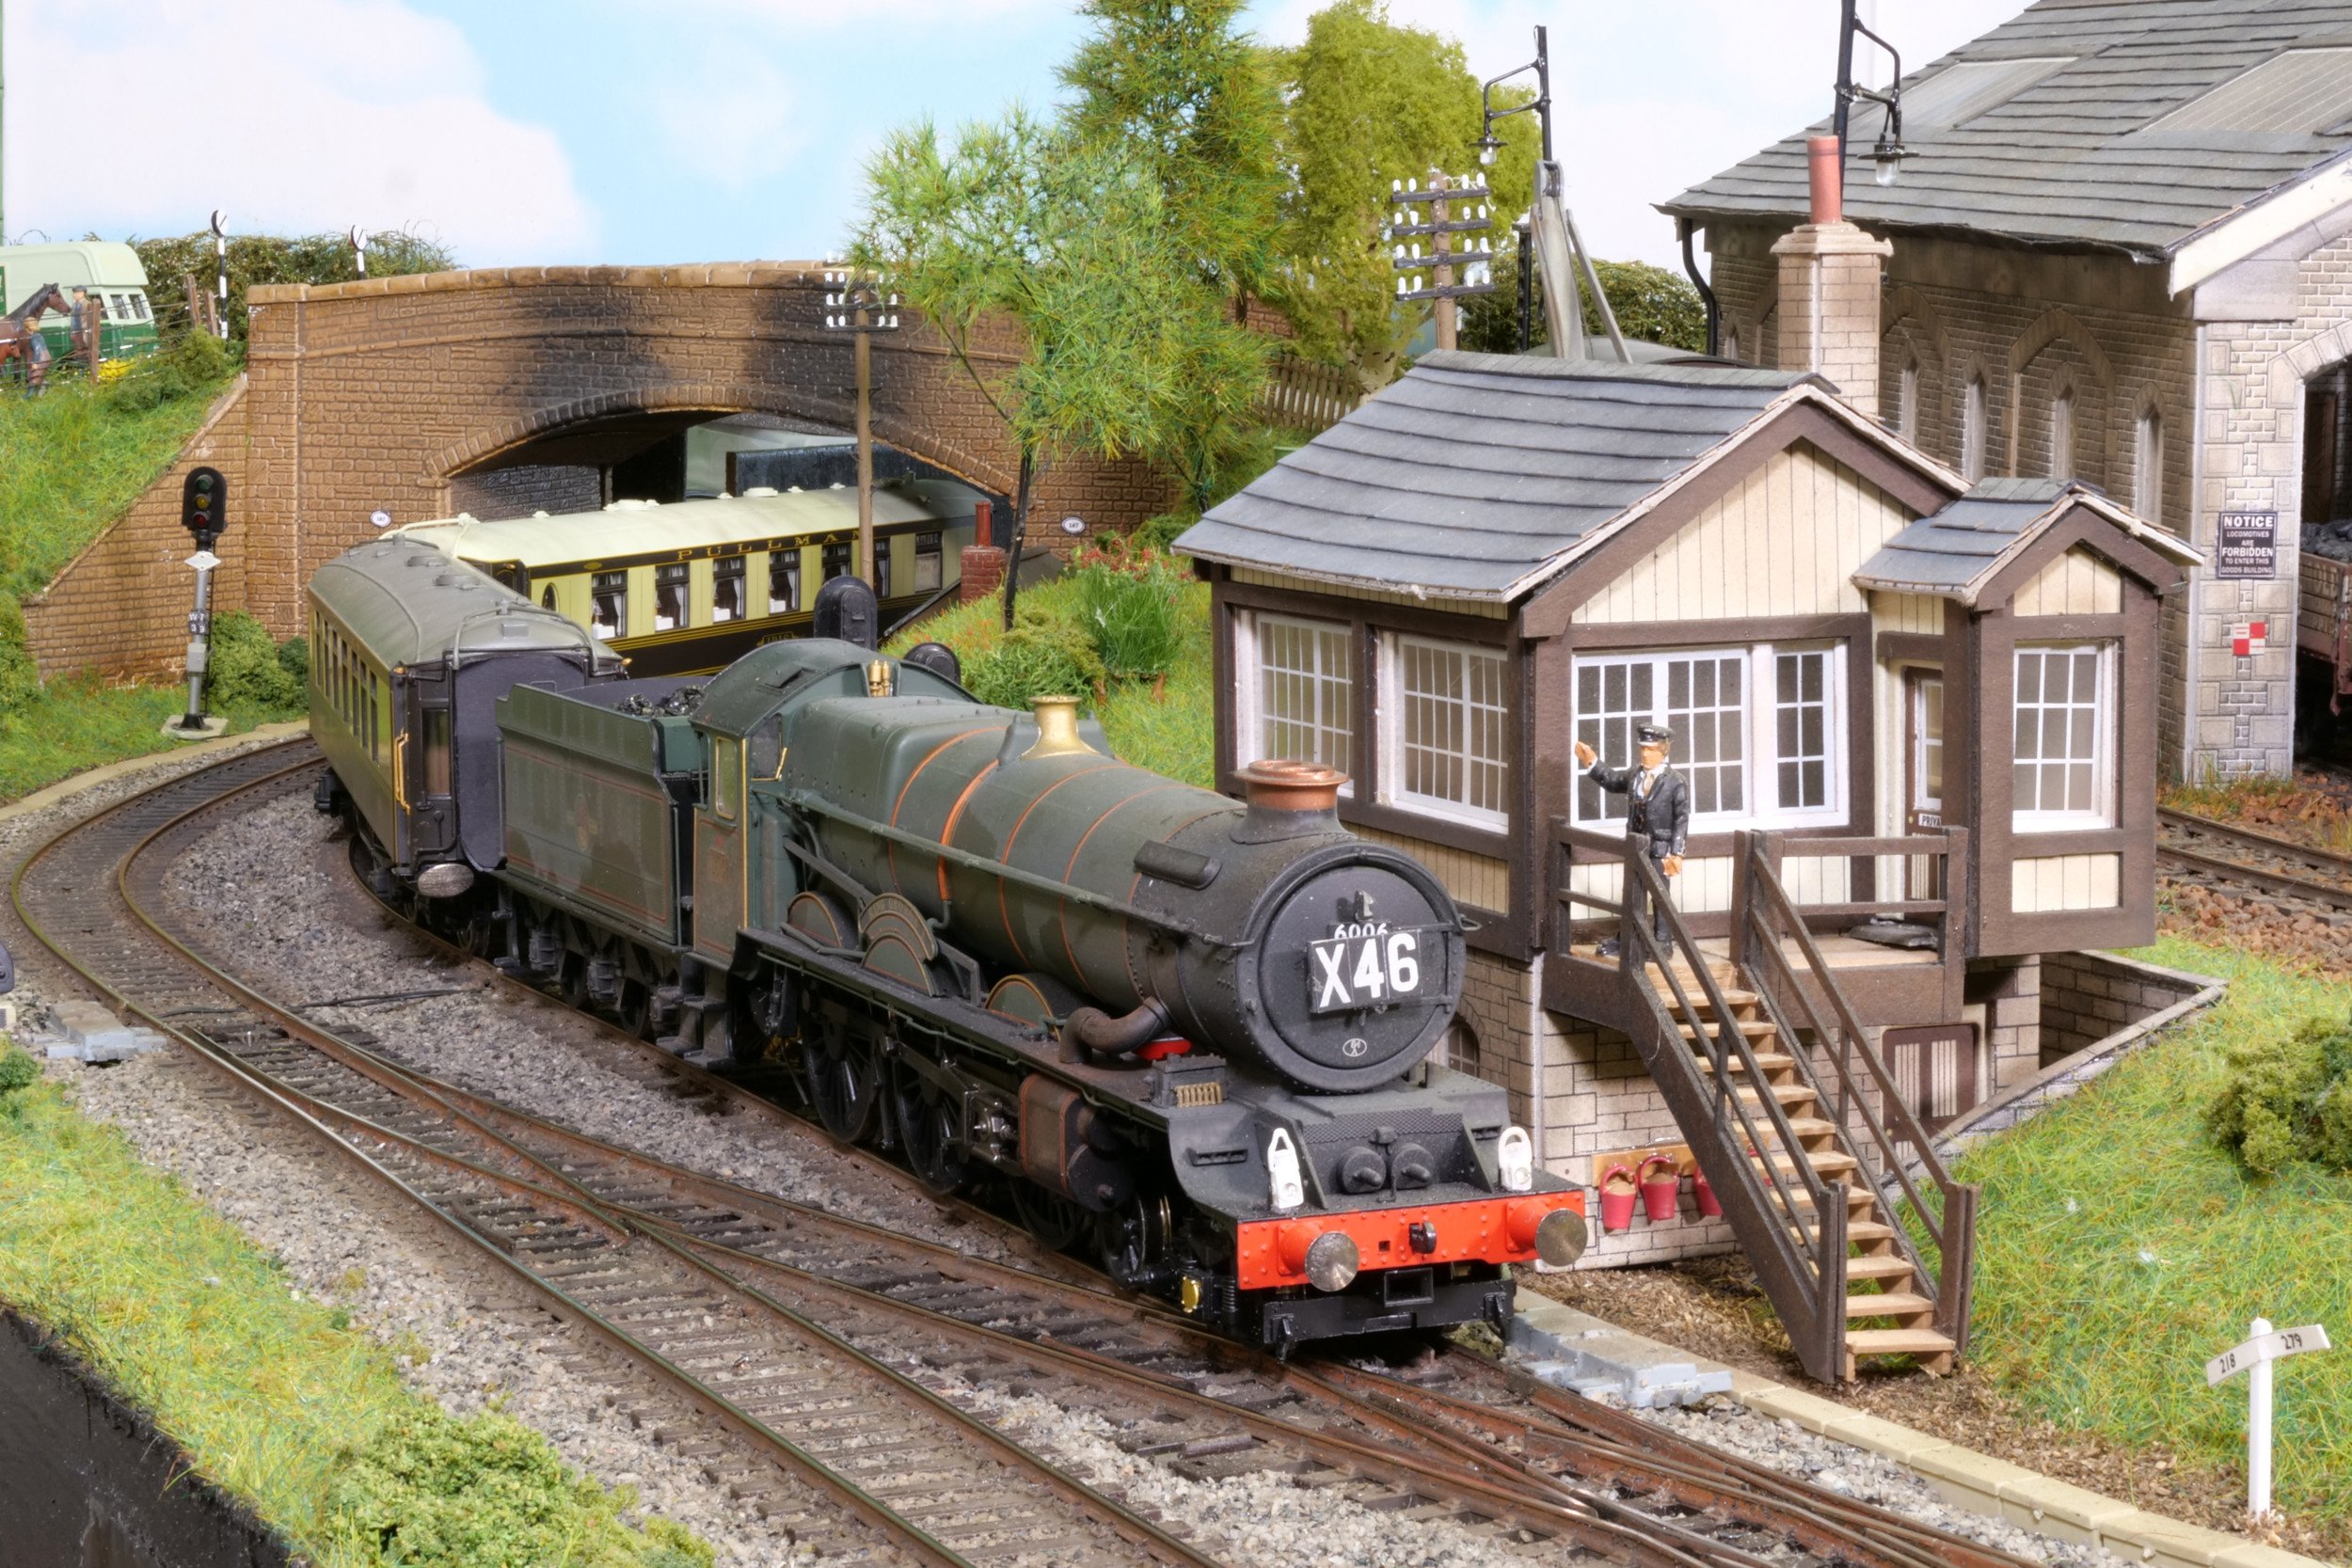 Martin Reynolds’ fictitious ‘OO’ gauge layout represents a secondary main line in Somerset and reflects operations in the late 1950s/early 1960s.